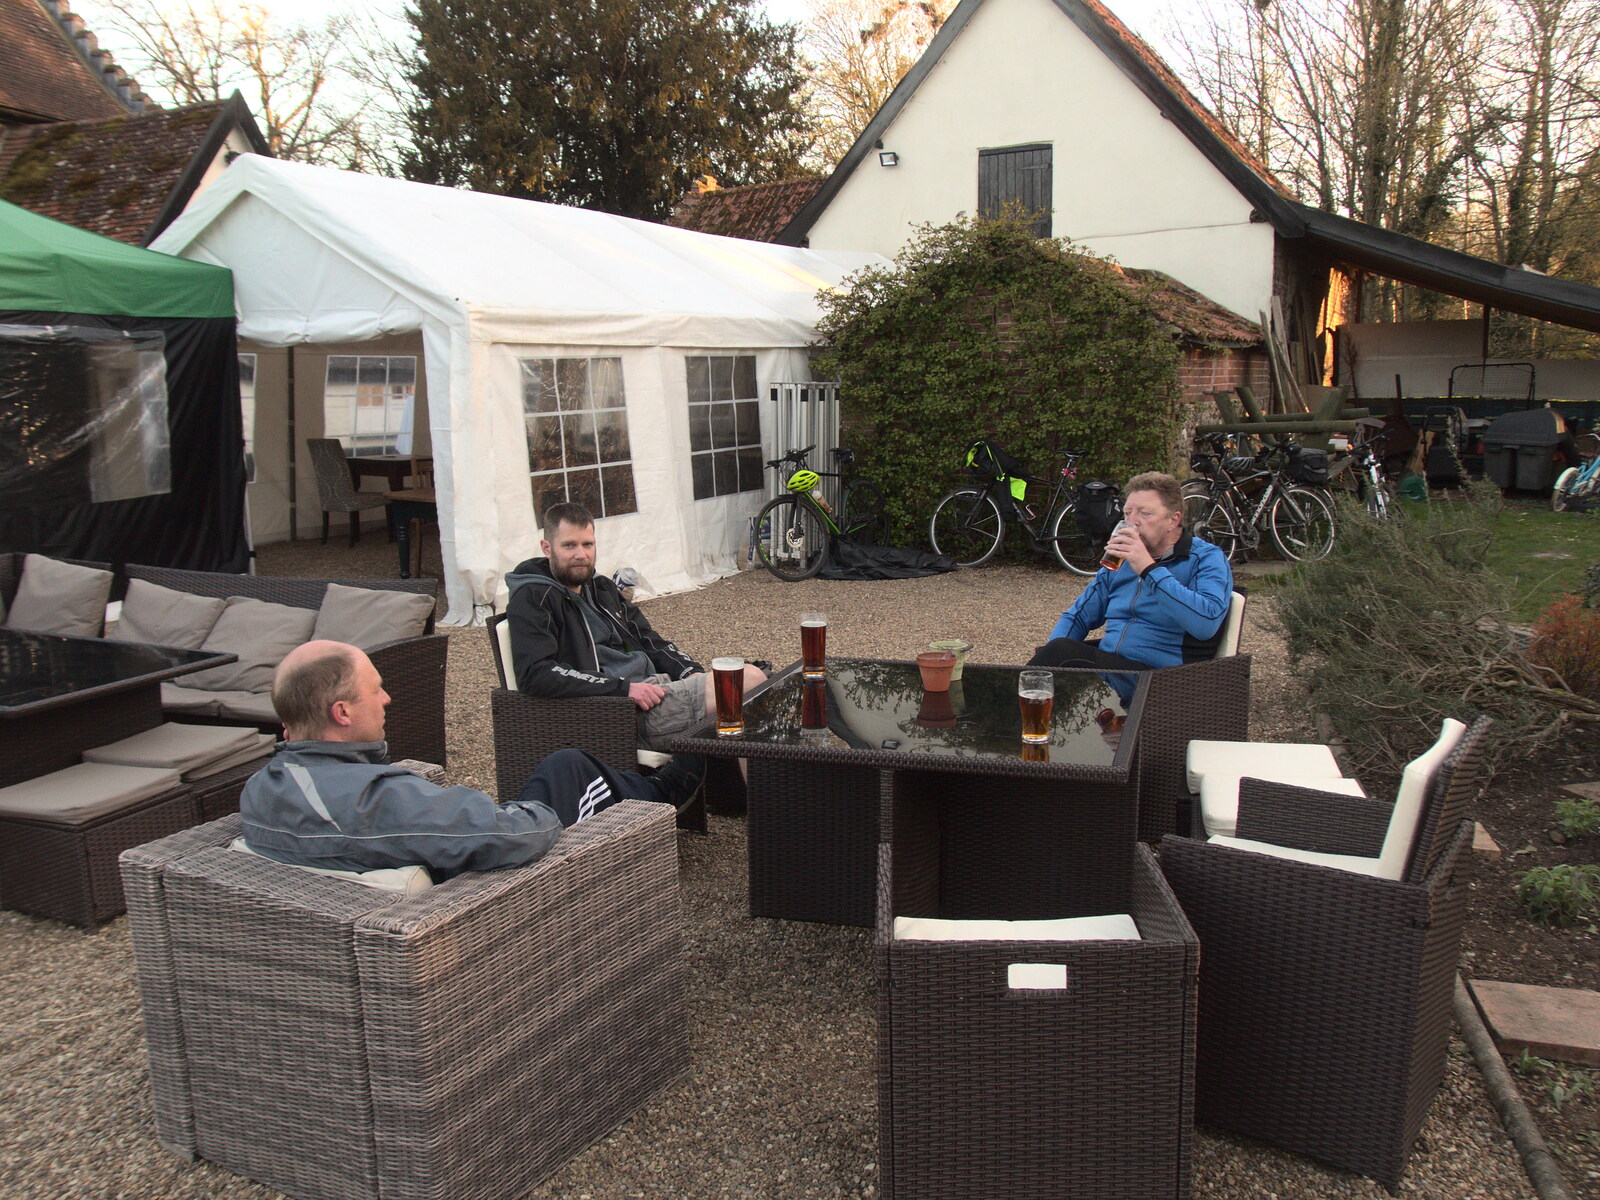 Paul, Phil and Gaz in the Swan beer garden from BSCC Beer Garden Hypothermia, Hoxne and Brome, Suffolk - 22nd April 2021